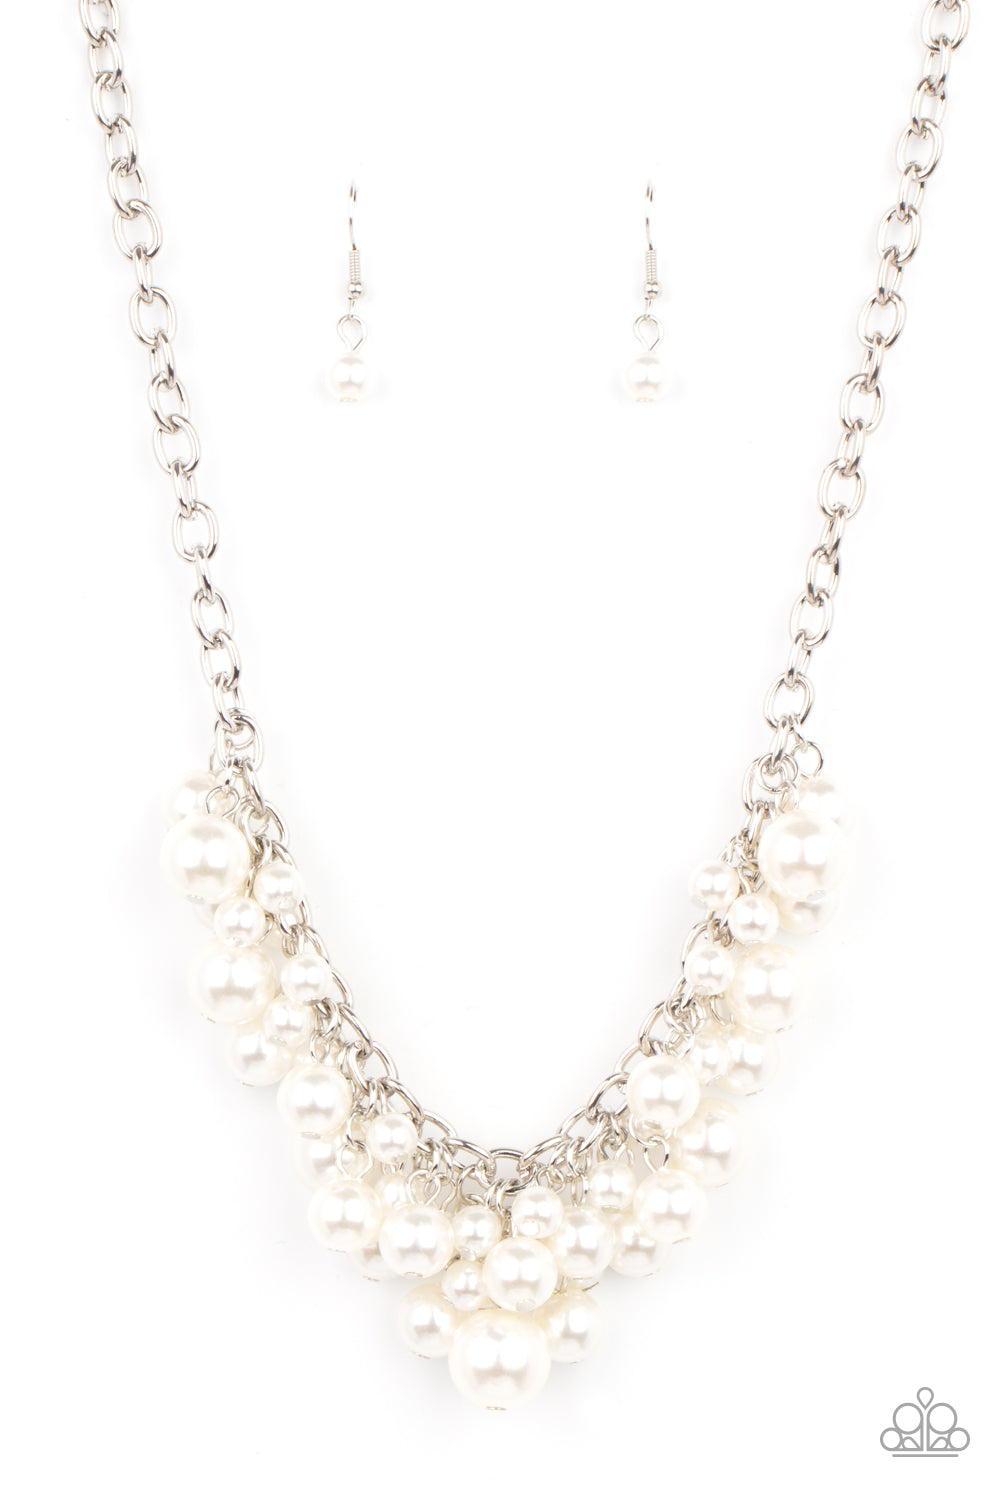 PRE-ORDER - Paparazzi Down For The COUNTESS - White Pearls - Necklace & Earrings - $5 Jewelry with Ashley Swint